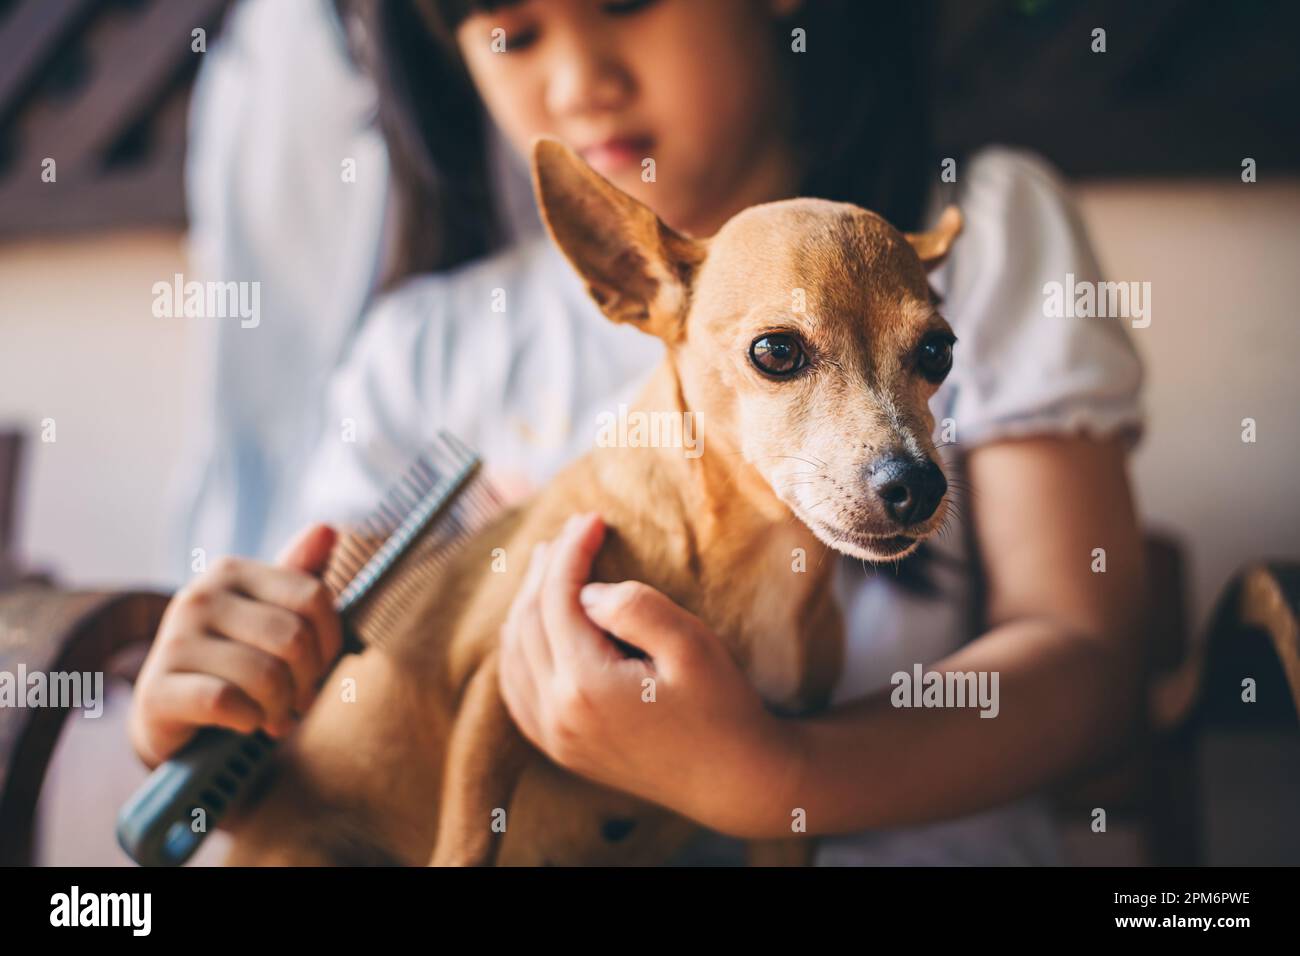 KId taking care of pet removing hair with comb brush at home. Stock Photo